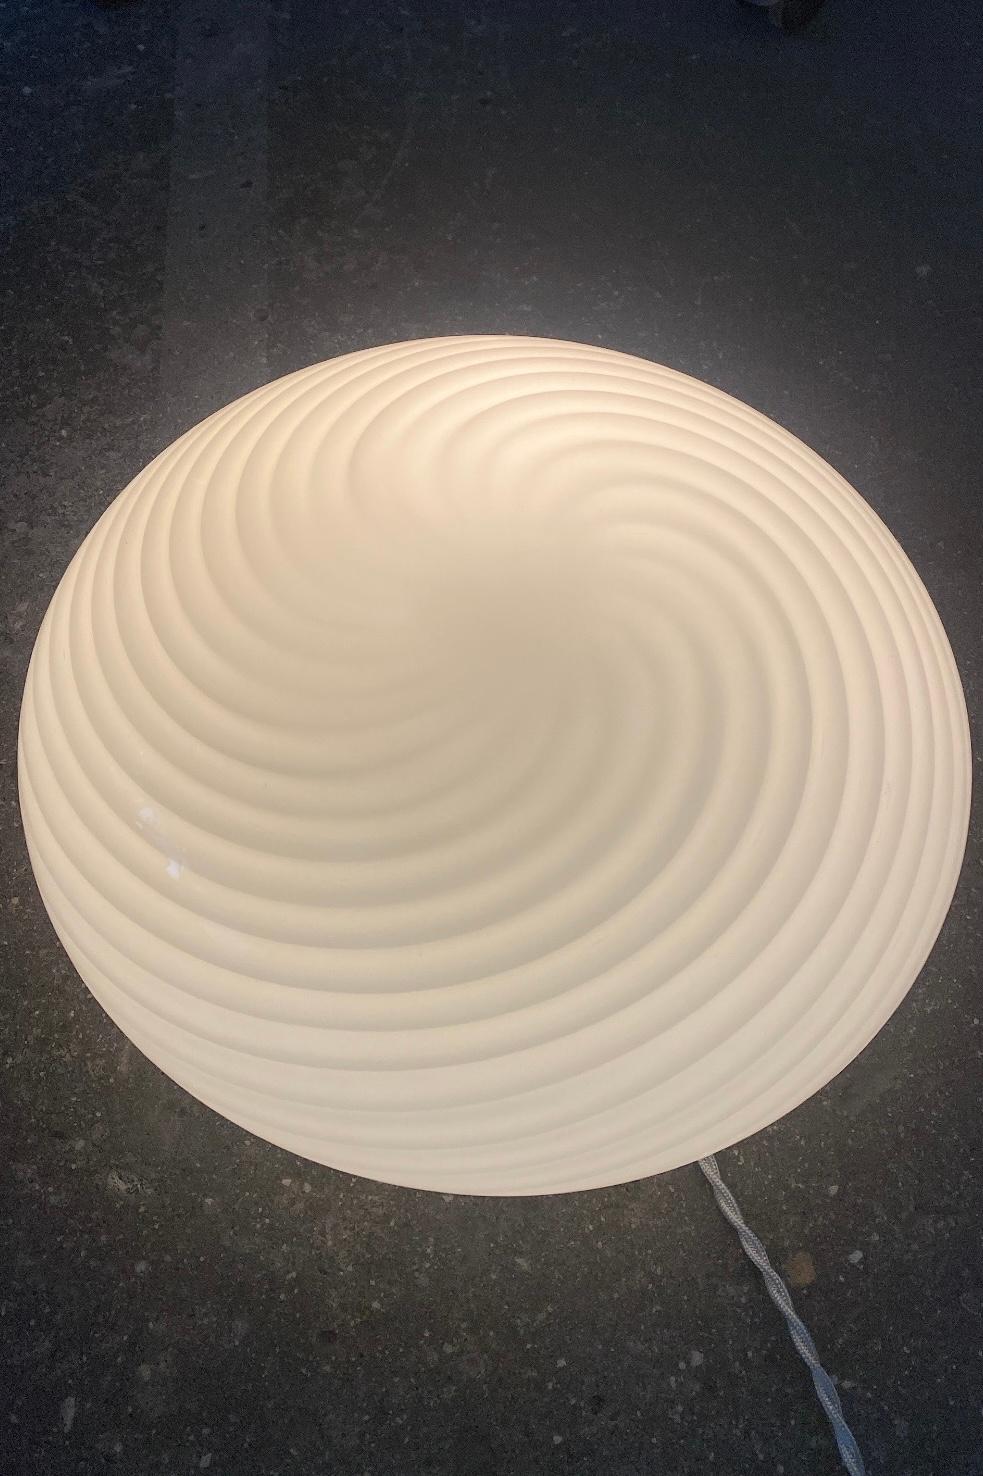 Vintage Murano ceiling lamp. Can be used both as a ceiling lamp and as a wall lamp - Mouth-blown in white opal glass with swirl and comes with a white base. E27 socket. Handmade in Italy, 1970s.

D: 36 cm H: 16 cm.

